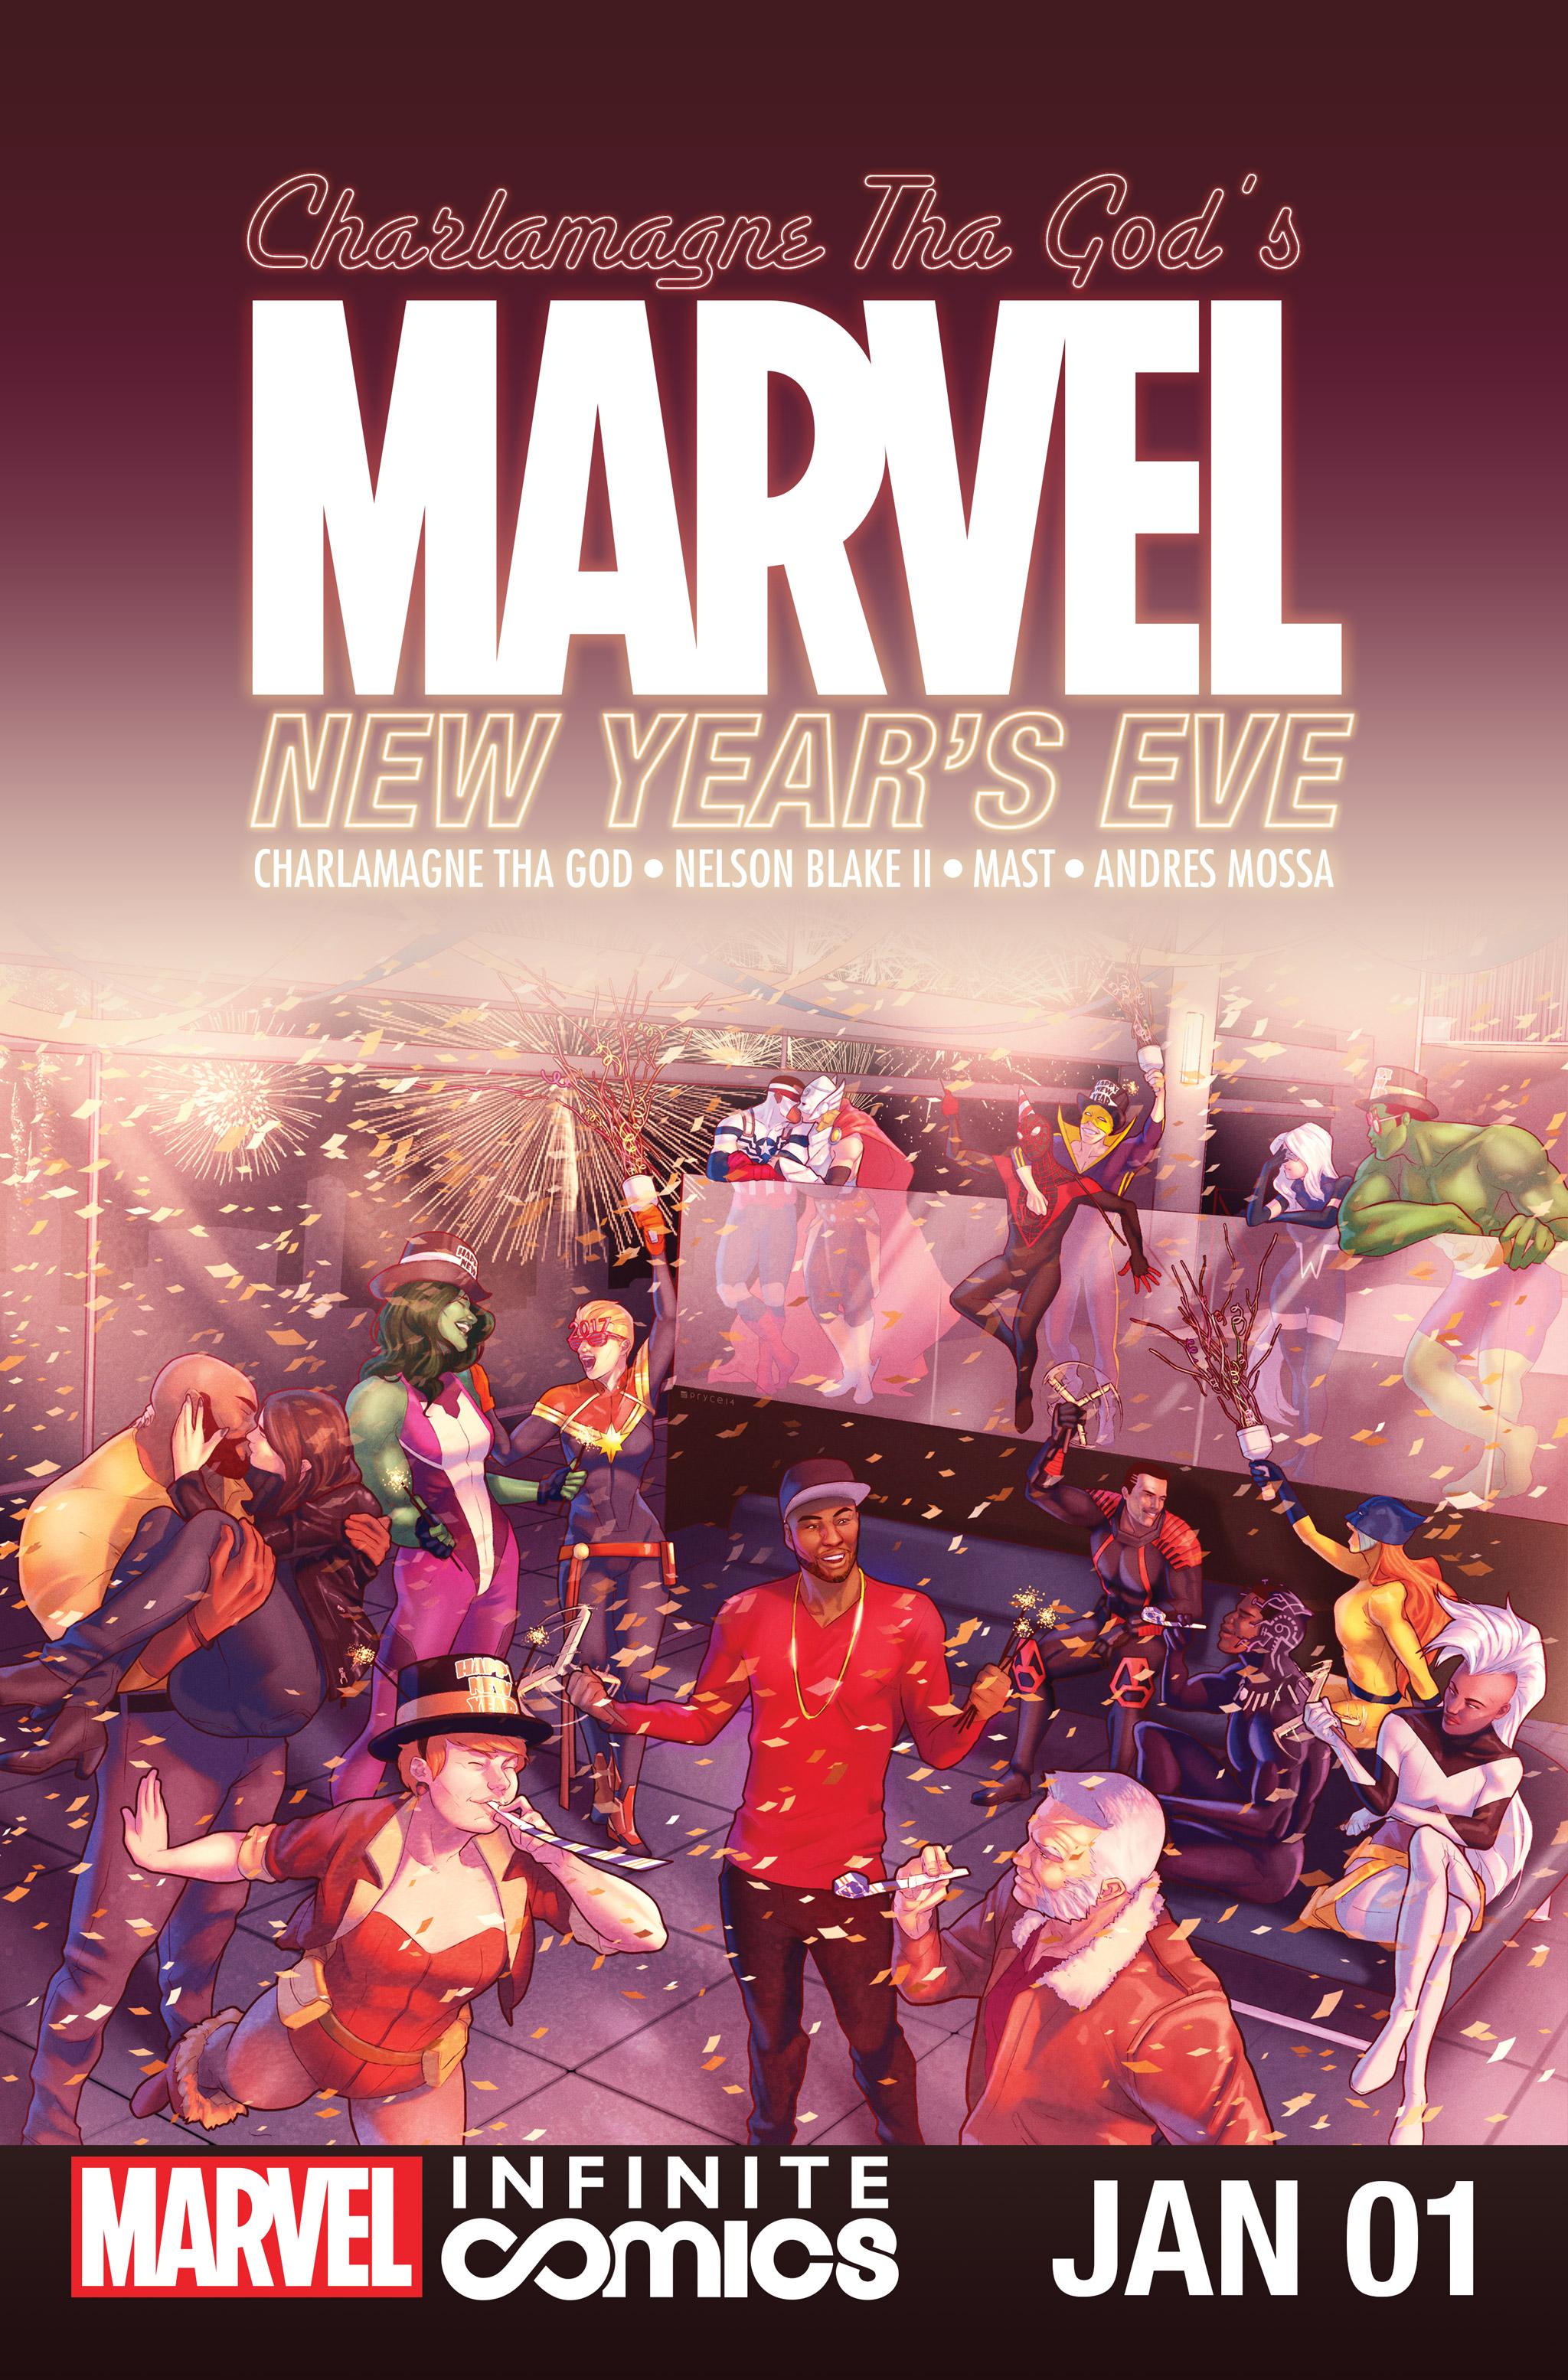 Marvel New Year's Eve Special Infinite Comic Vol. 1 #1